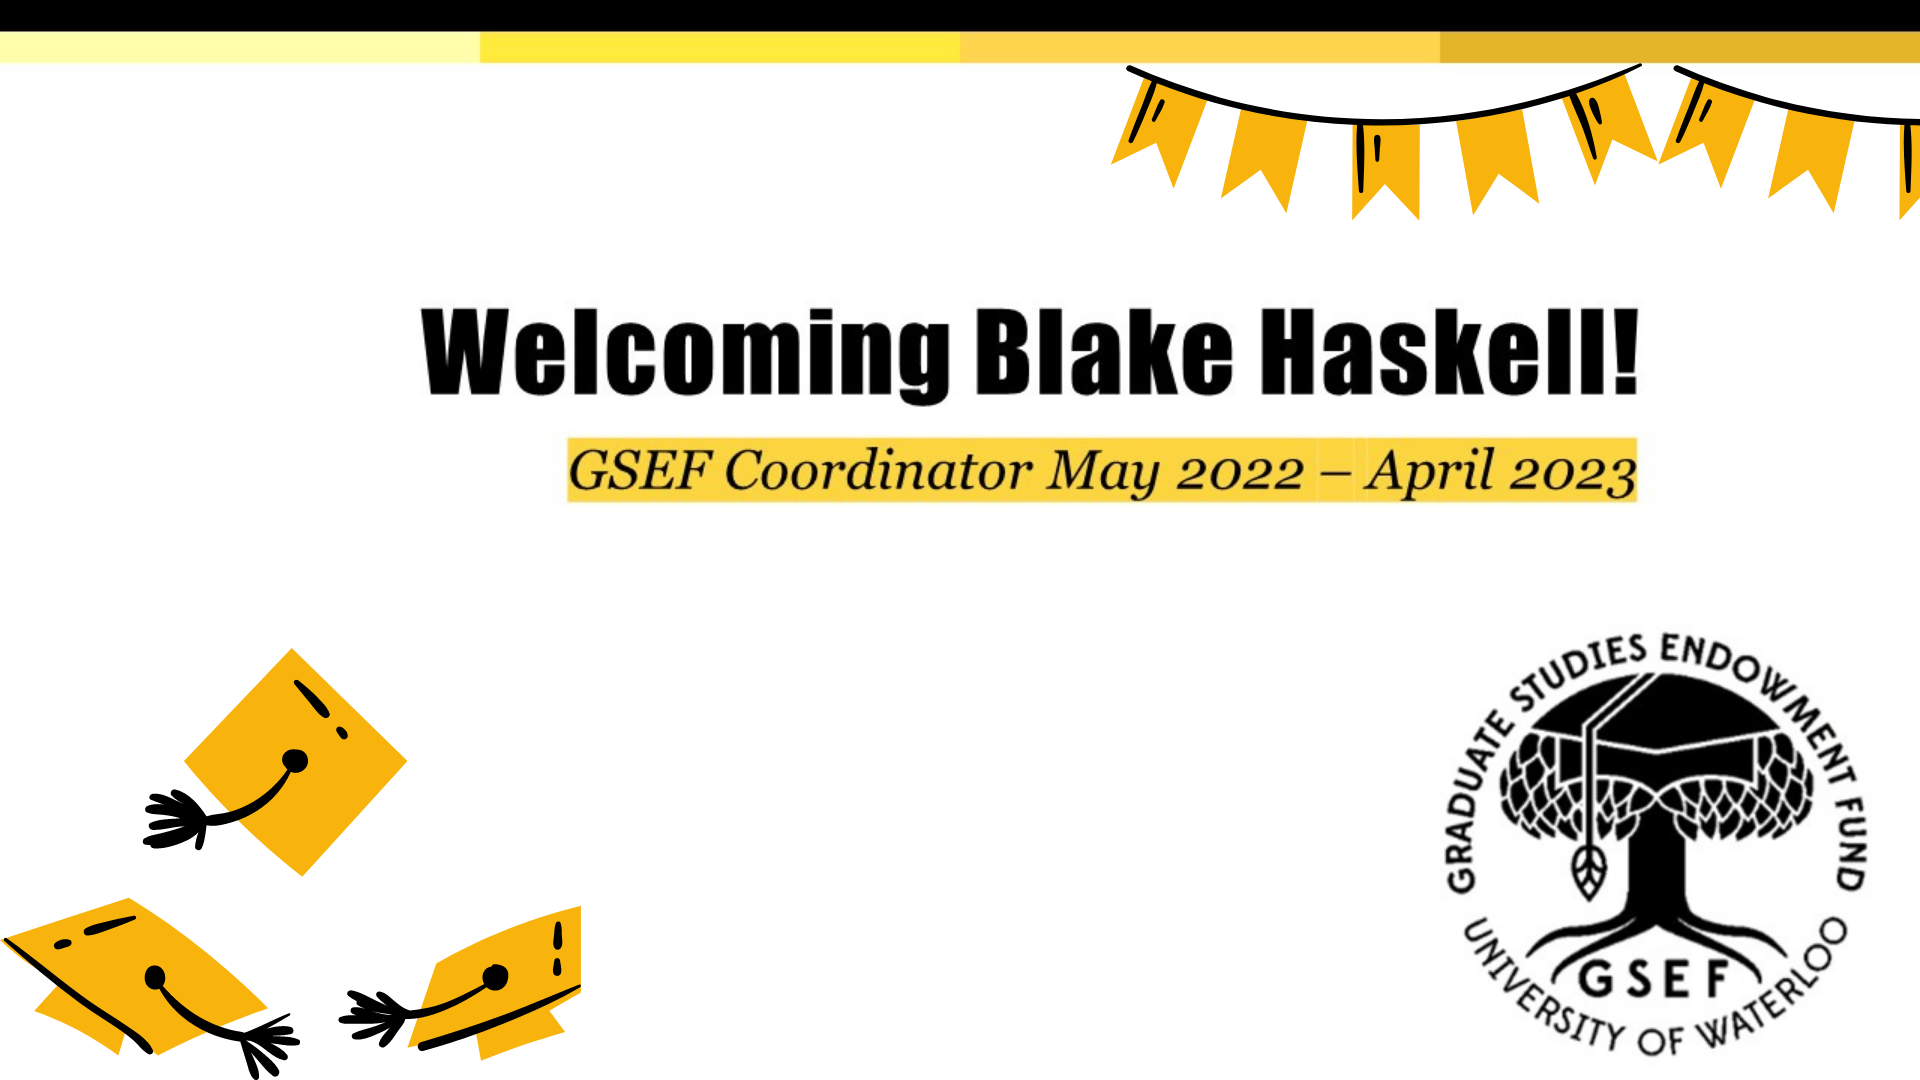 welcoming blake haskell gsef coordinator may 2022 to april 2023